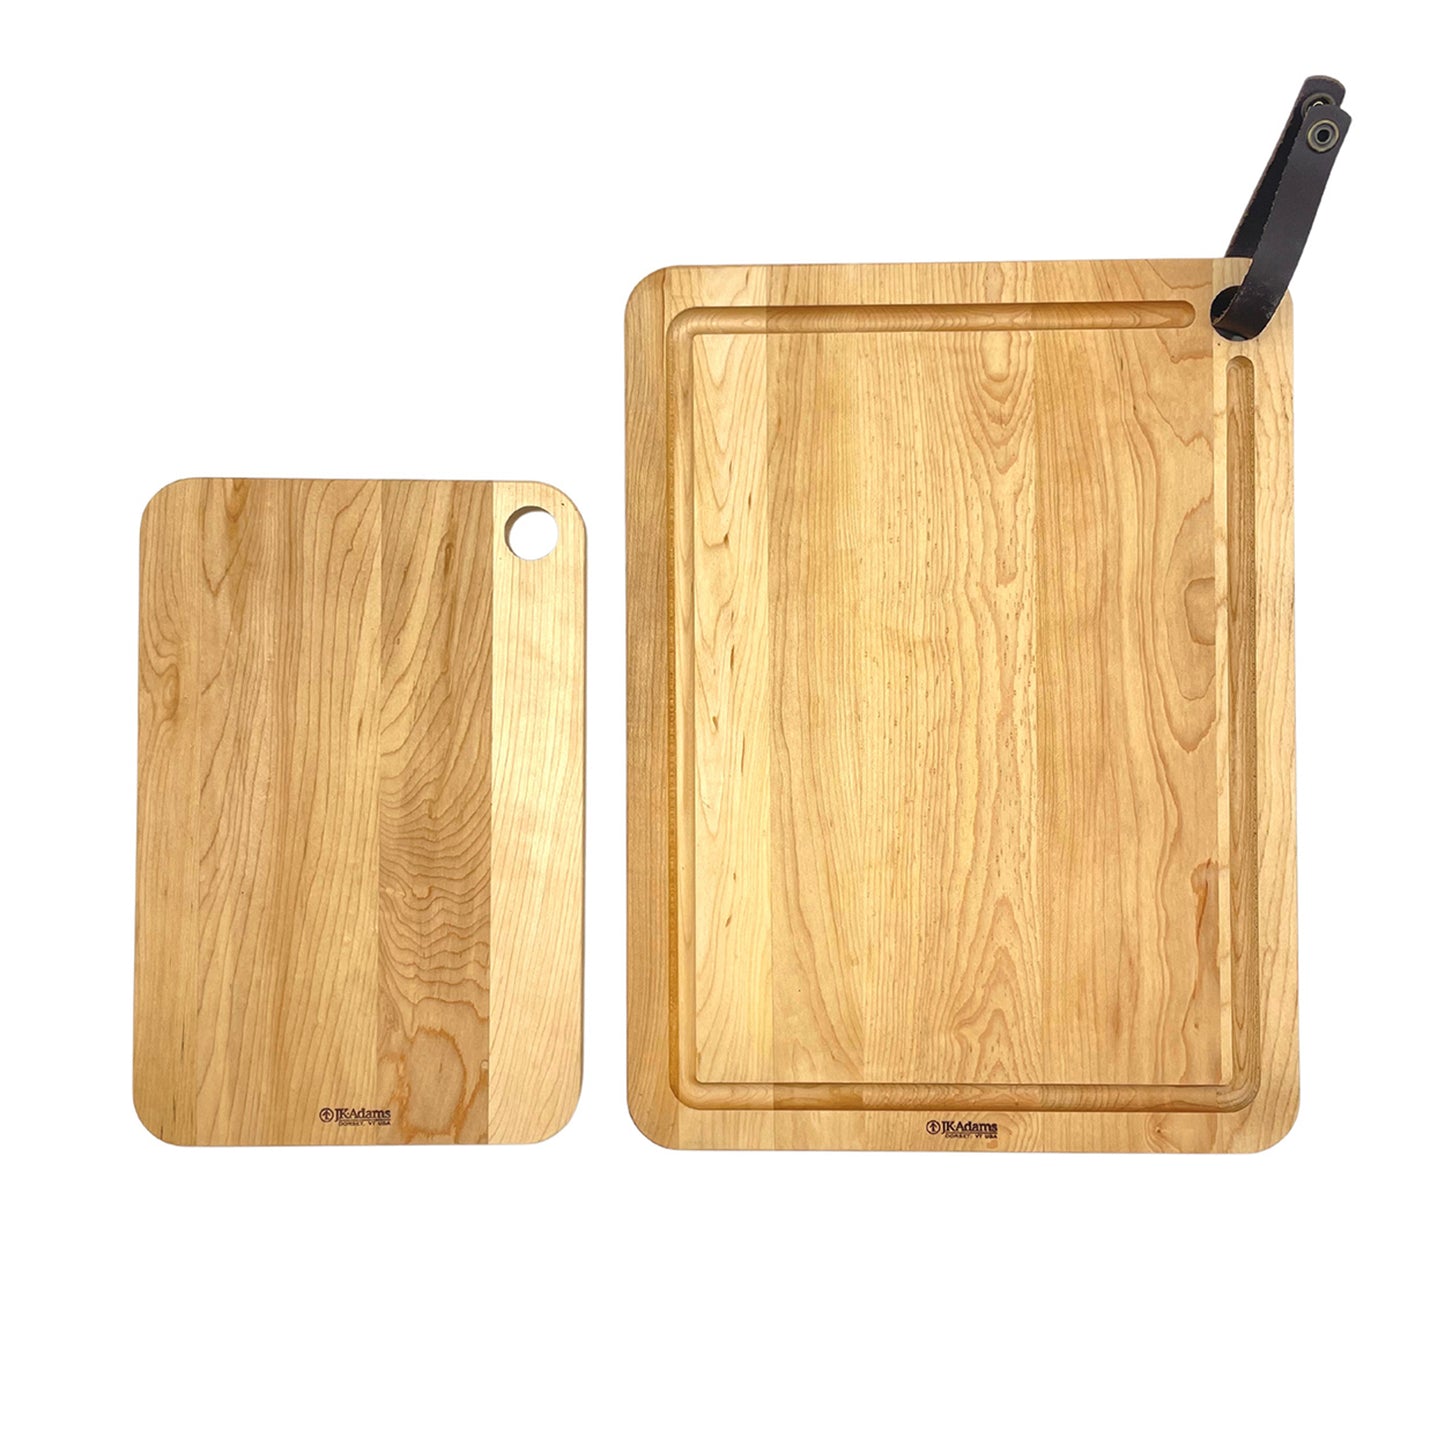 Duo of Maple Cutting Boards